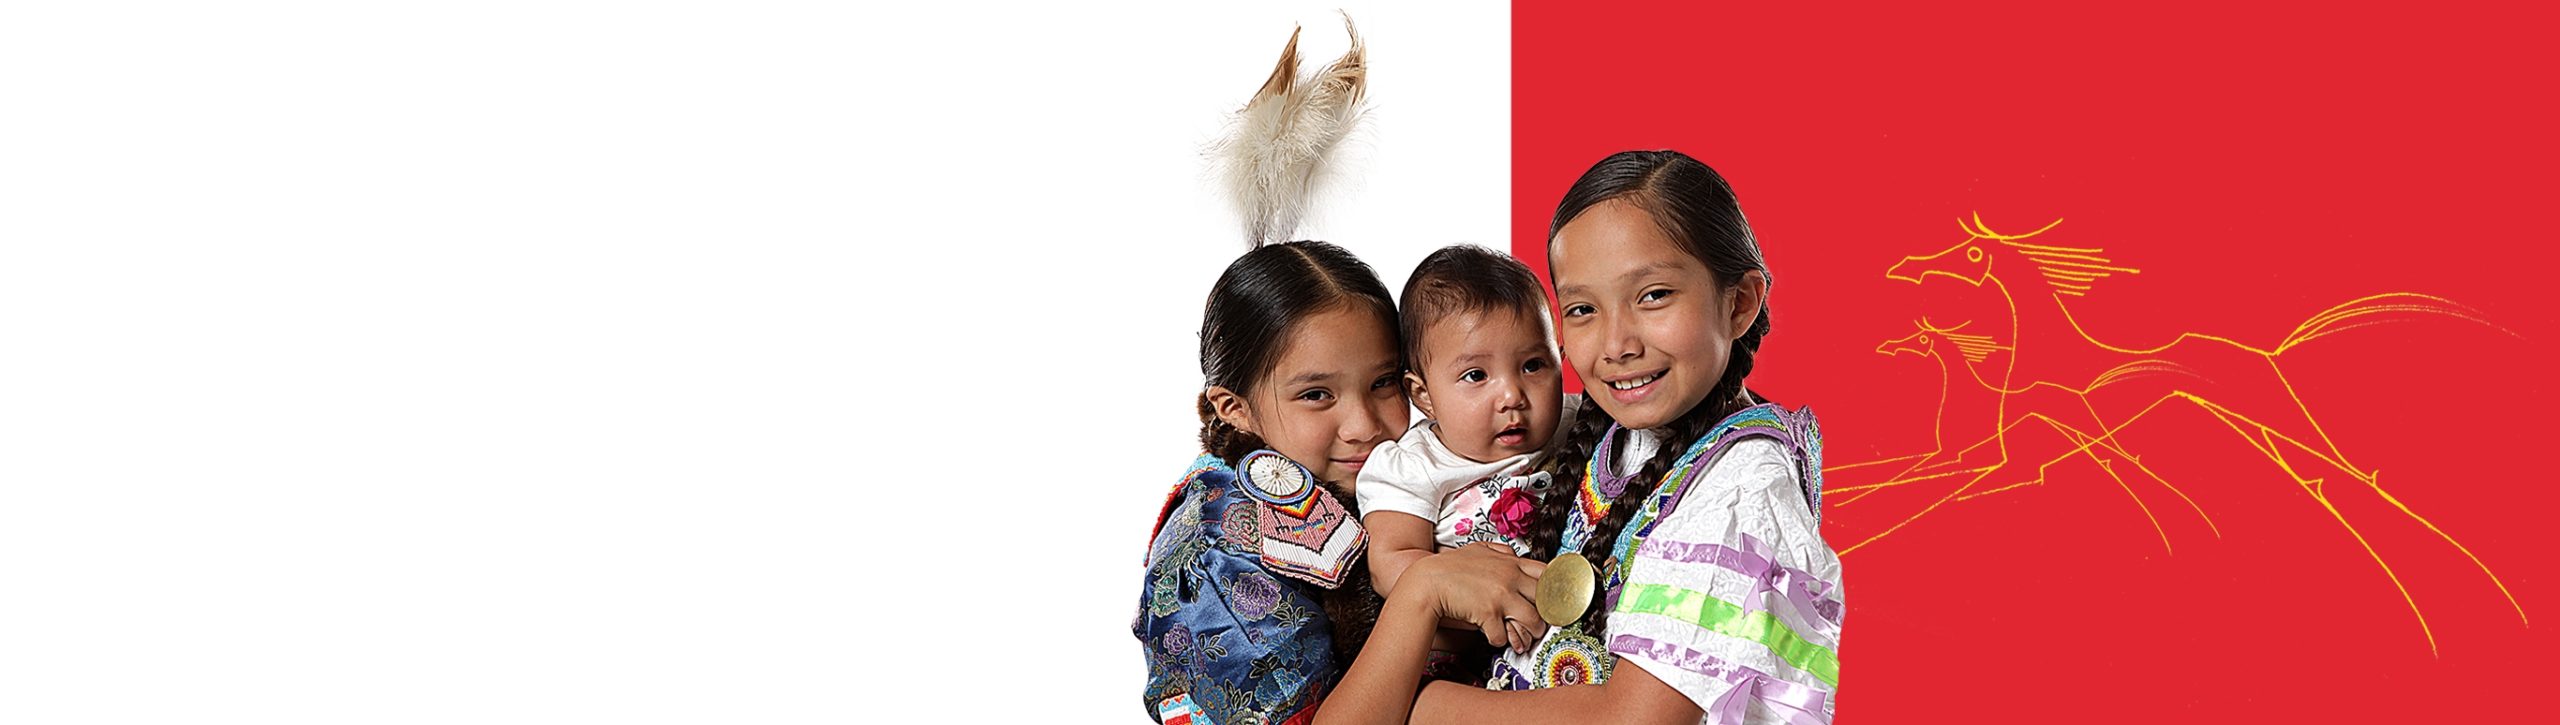 Three young girls dressed in traditional Lakota attire